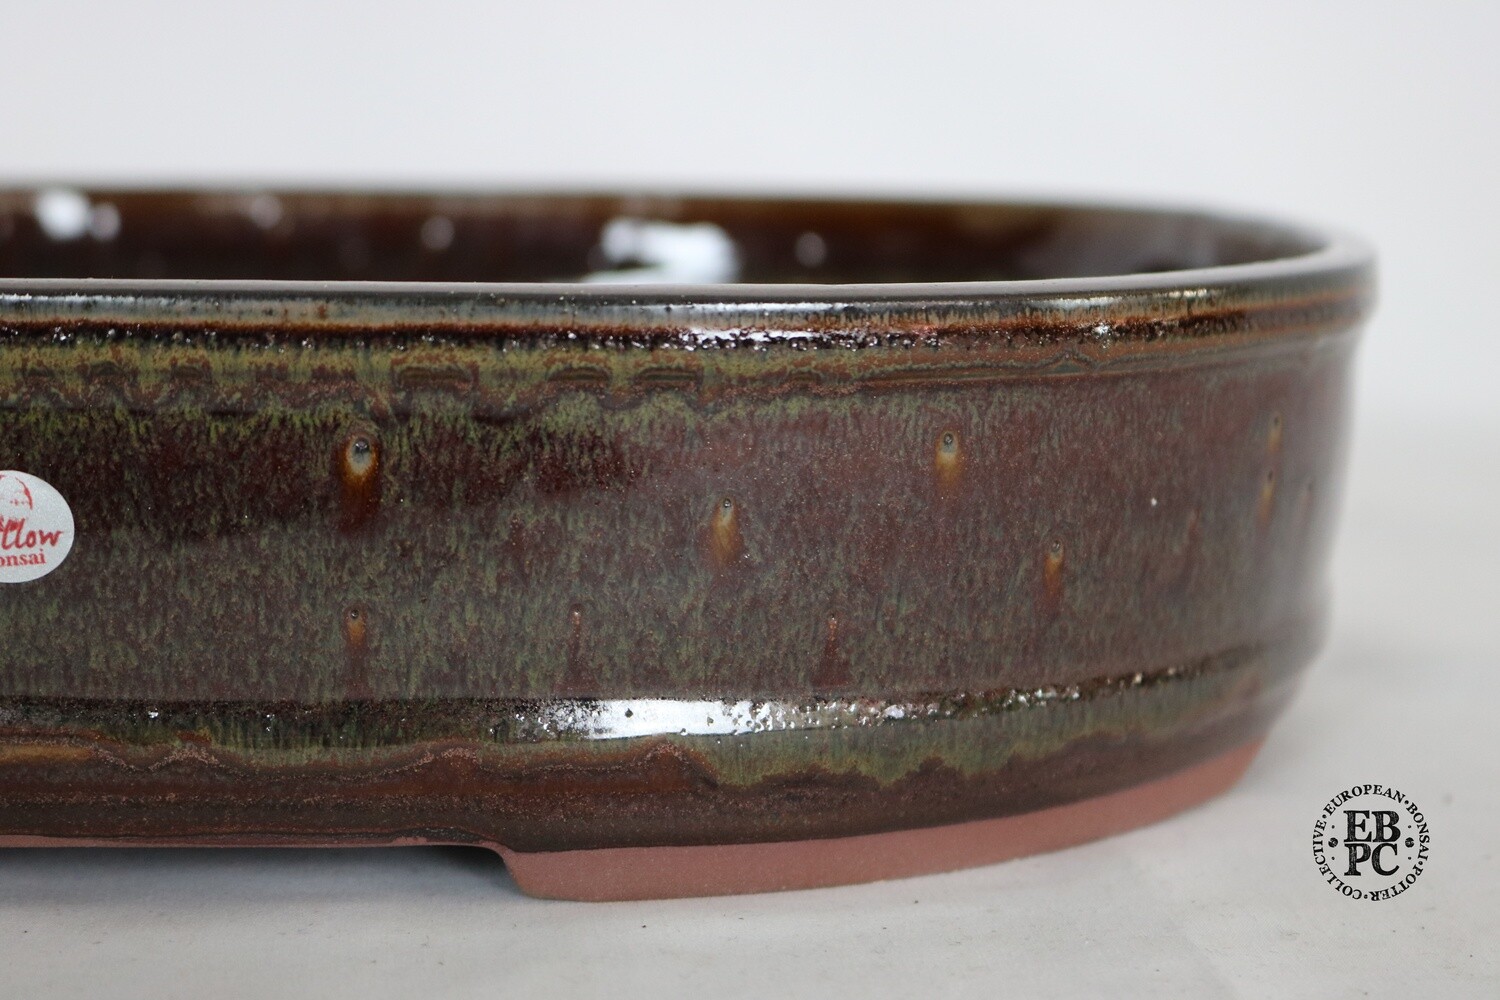 Willow Bonsai Pots. 34cm; Oval; Dark Honey Glaze; Recessed Feet; Made in South Africa.